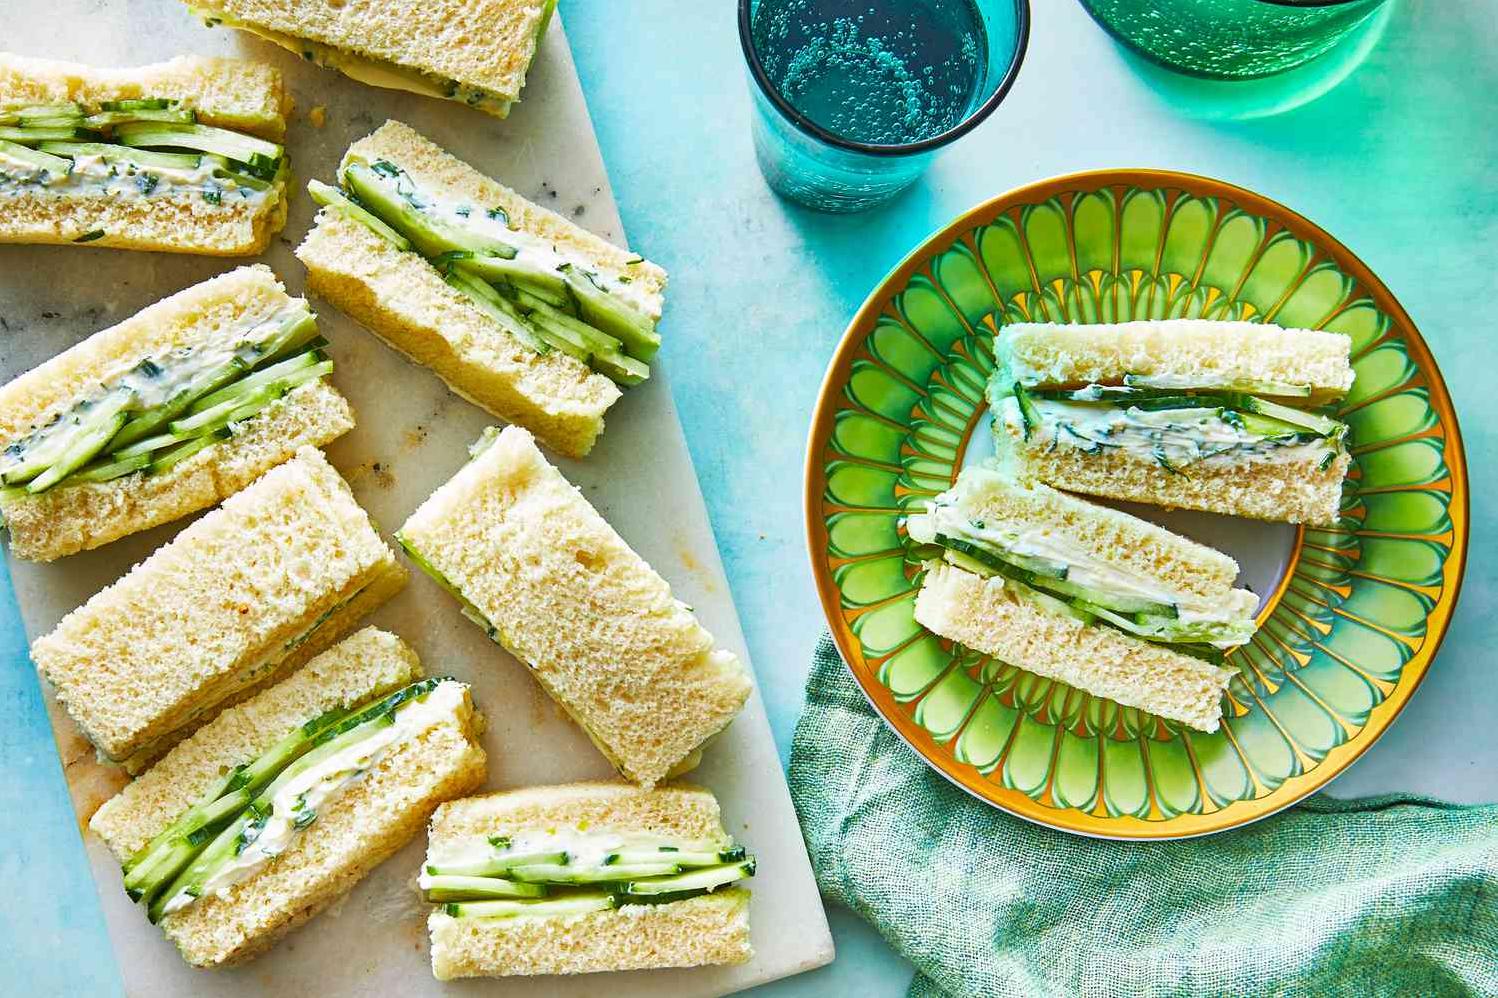  This delicious tea sandwich is the perfect balance of savory and sweet.